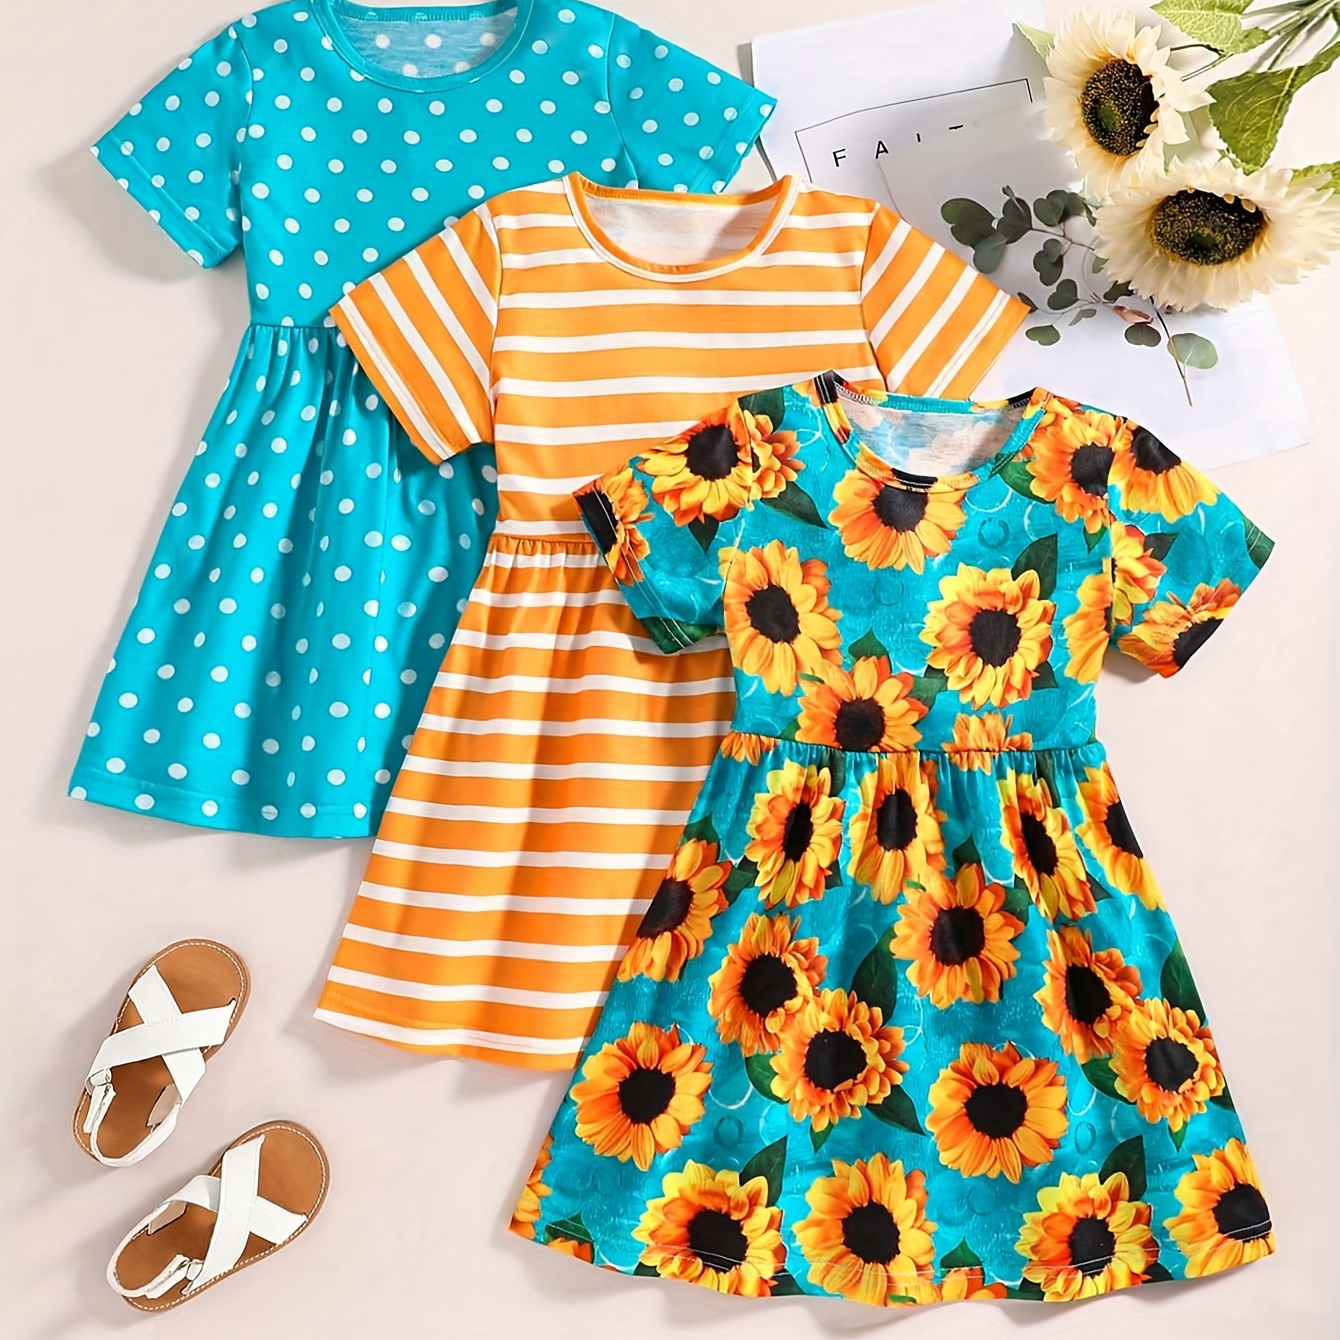 

3pcs Girls Casual Polka Dot Print Stripped Sunflower Graphic Short Sleeve Dress Set For Summer Party Gift